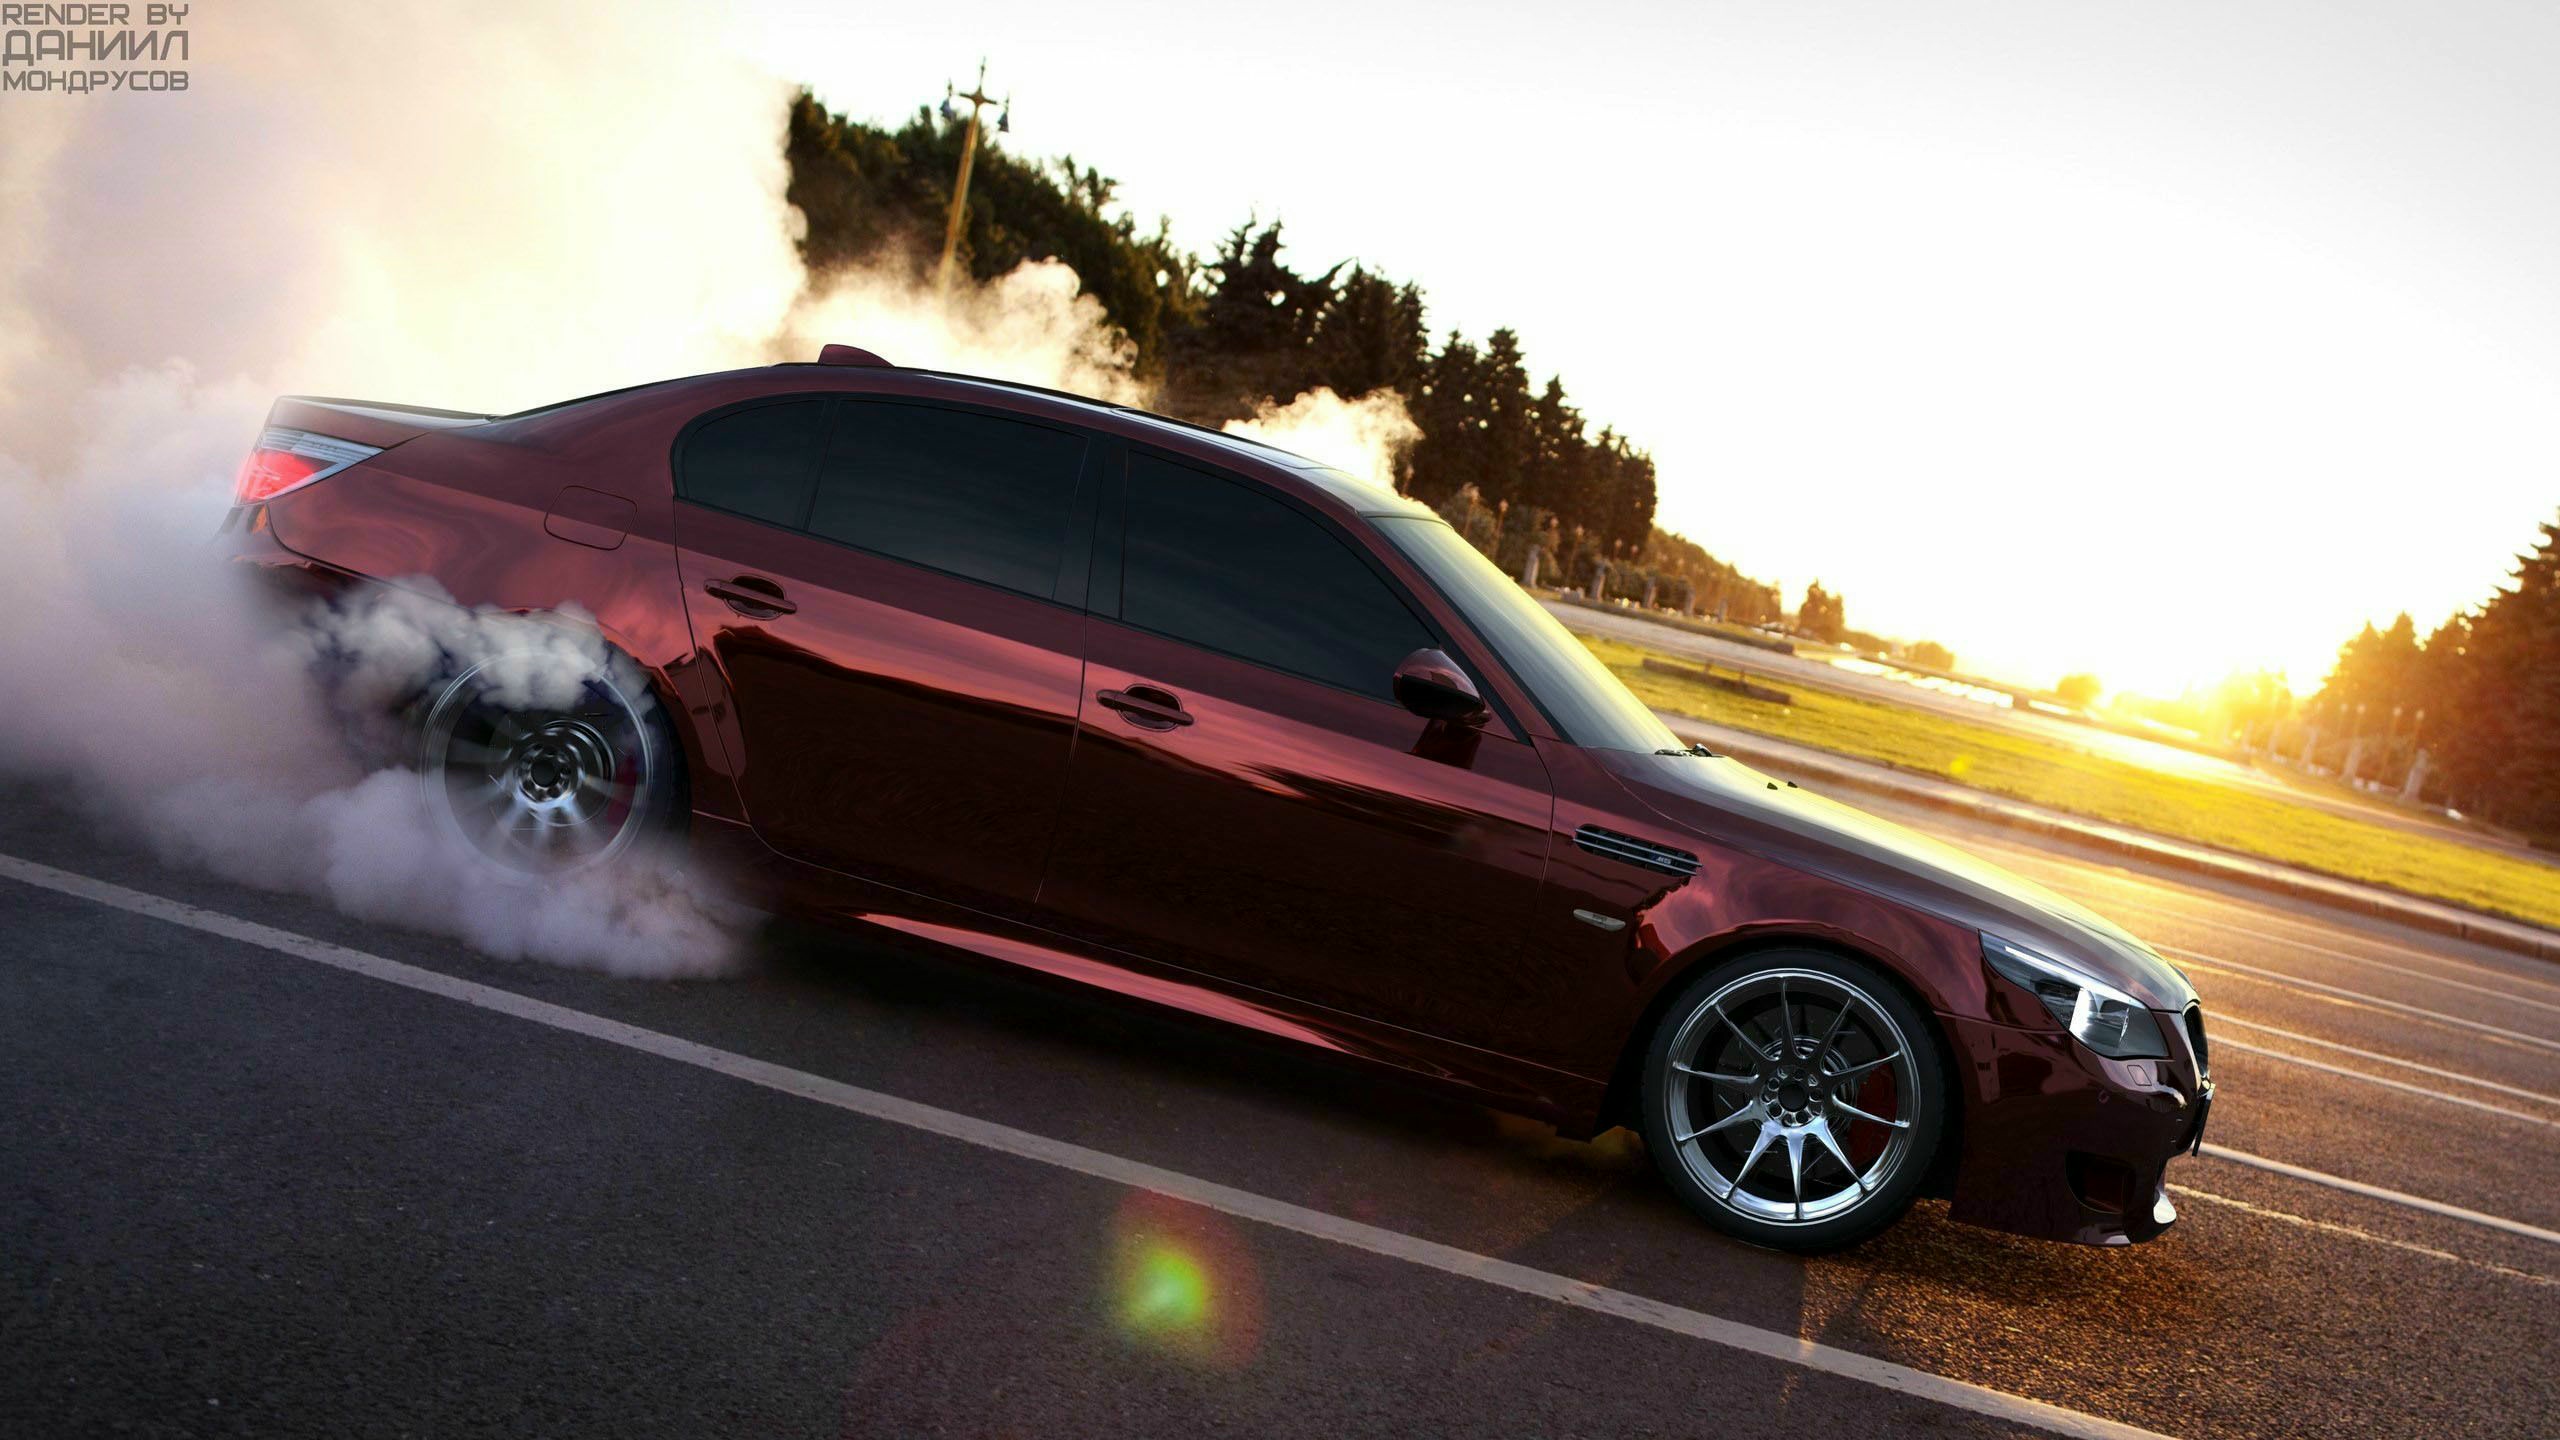 Bmw E60 M5 HD Wallpaper Background Image Photos Pictures